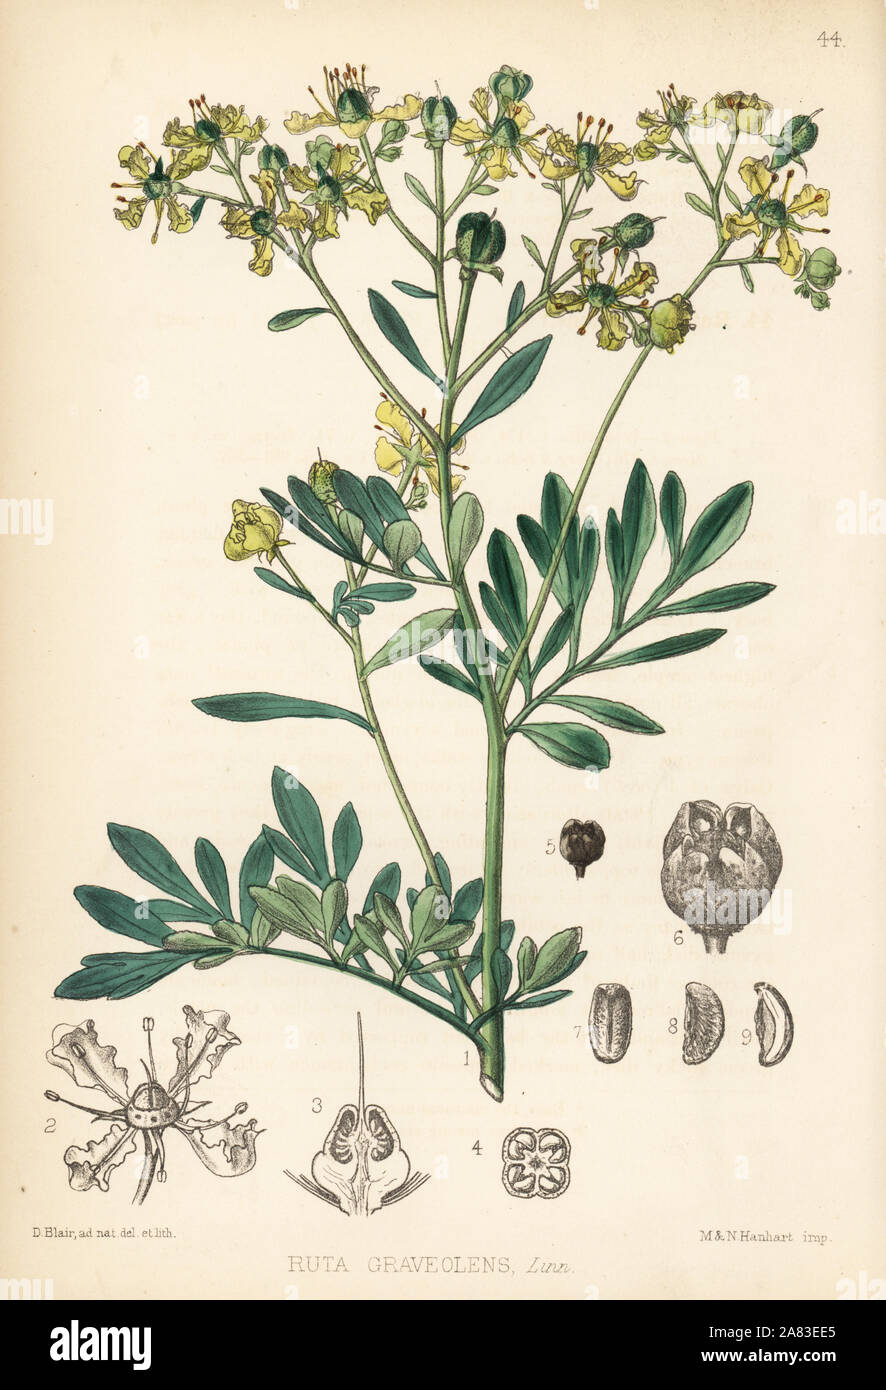 Common rue or herb-of-grace, Ruta graveolens. Handcoloured lithograph by Hanhart after a botanical illustration by David Blair from Robert Bentley and Henry Trimen's Medicinal Plants, London, 1880. Stock Photo